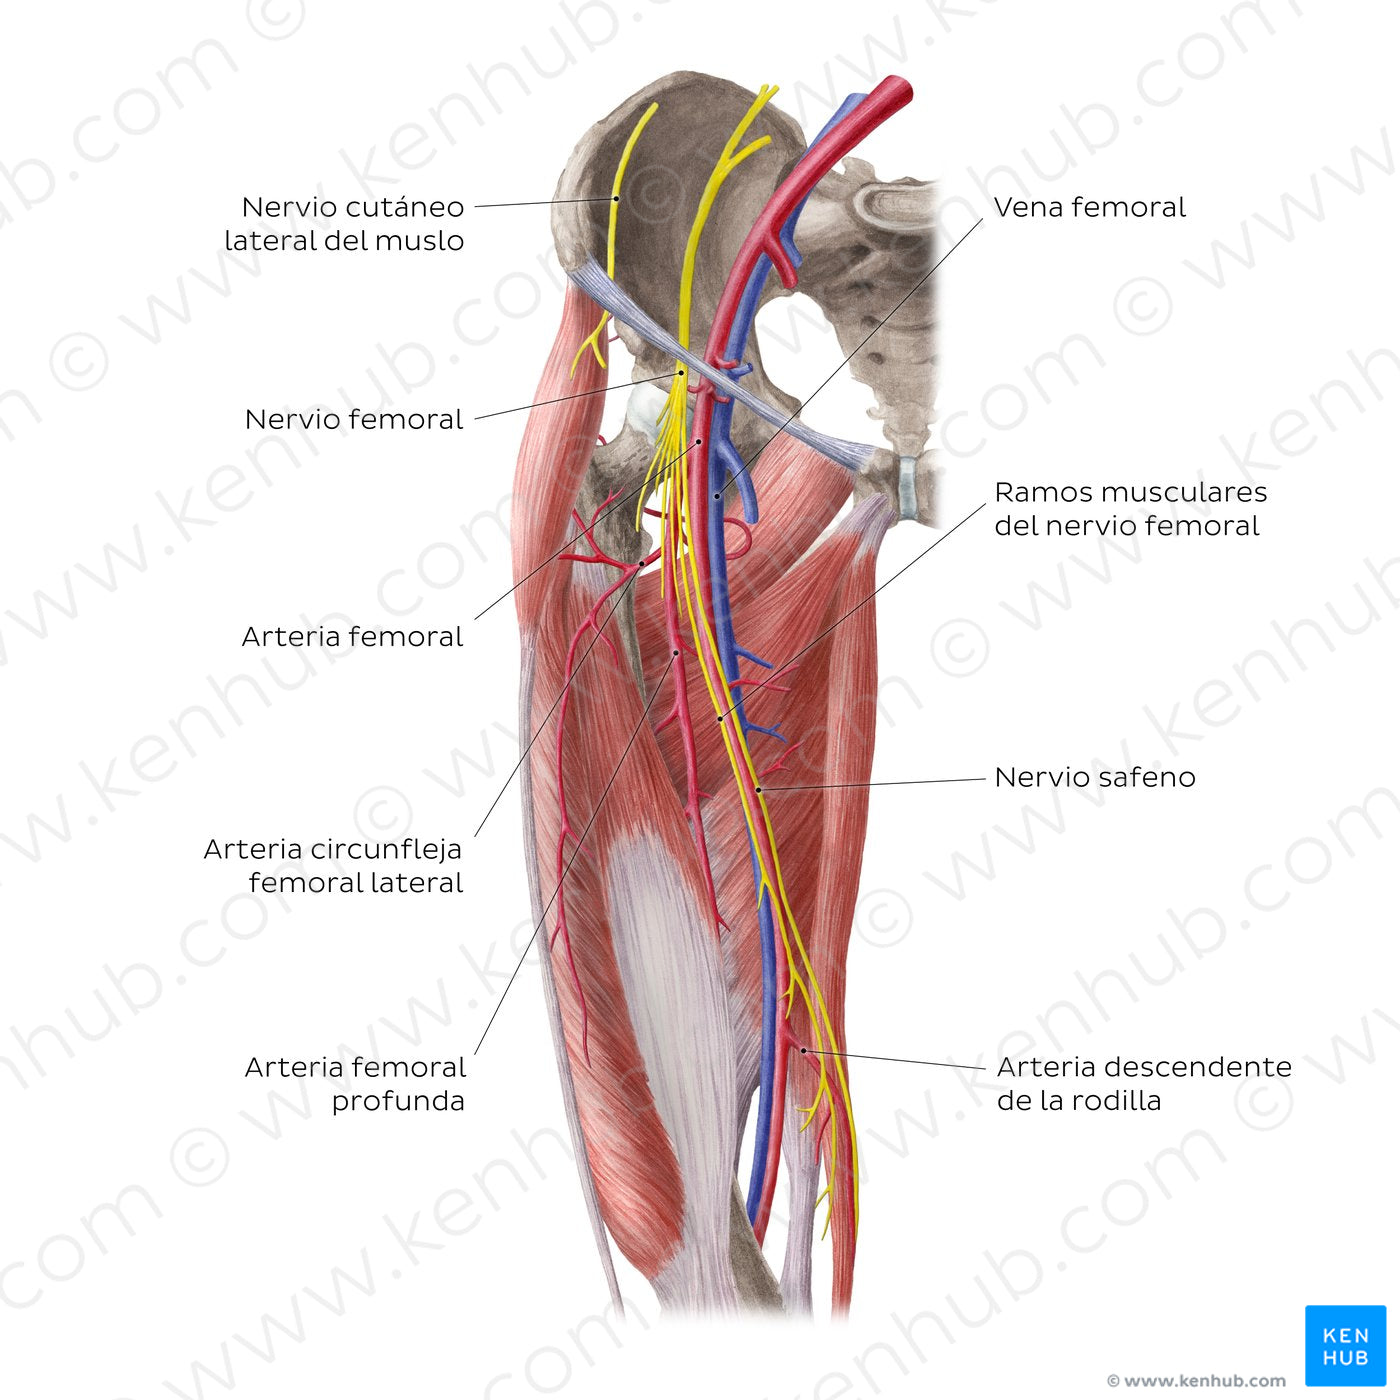 Neurovasculature of the hip and thigh (anterior view) (Spanish)